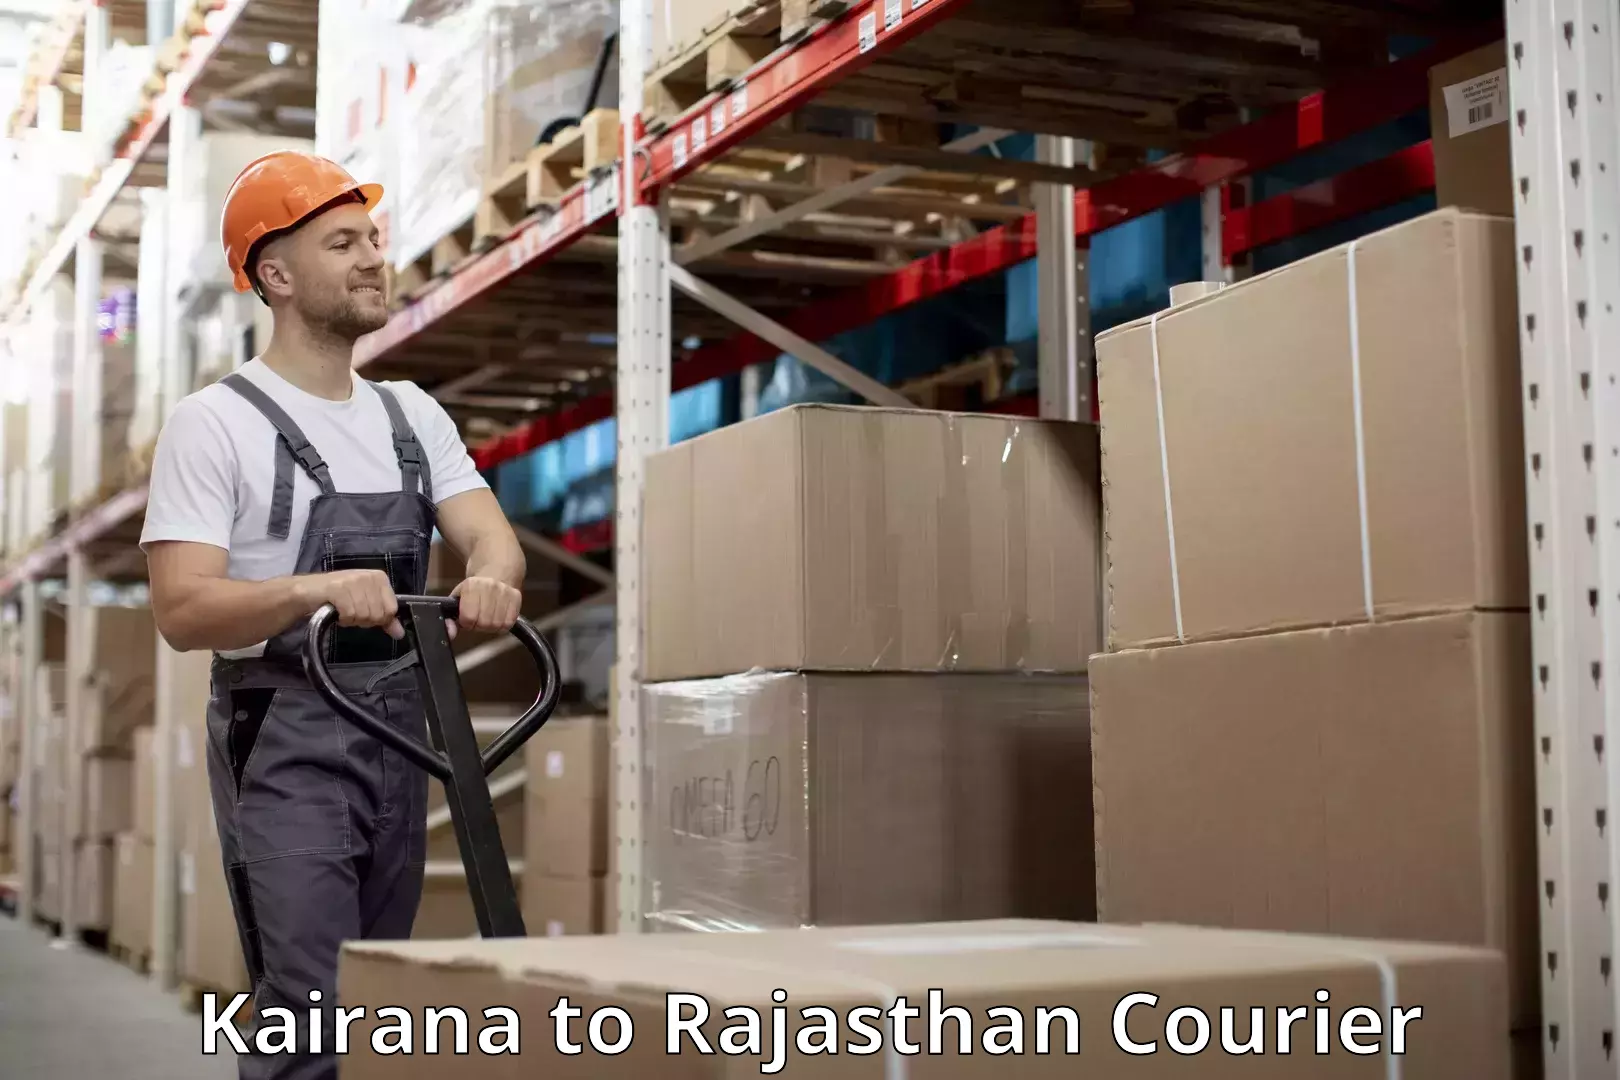 Luggage shipping specialists Kairana to Rajasthan